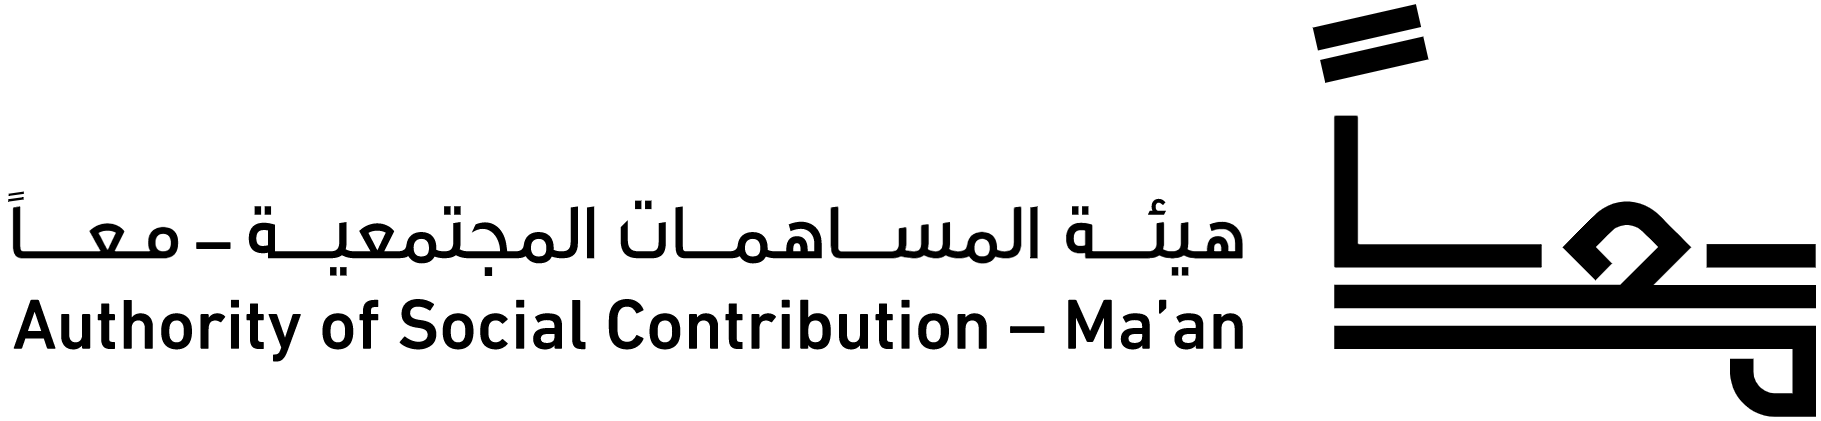 Authority Of Social Contribution  Ma'an 